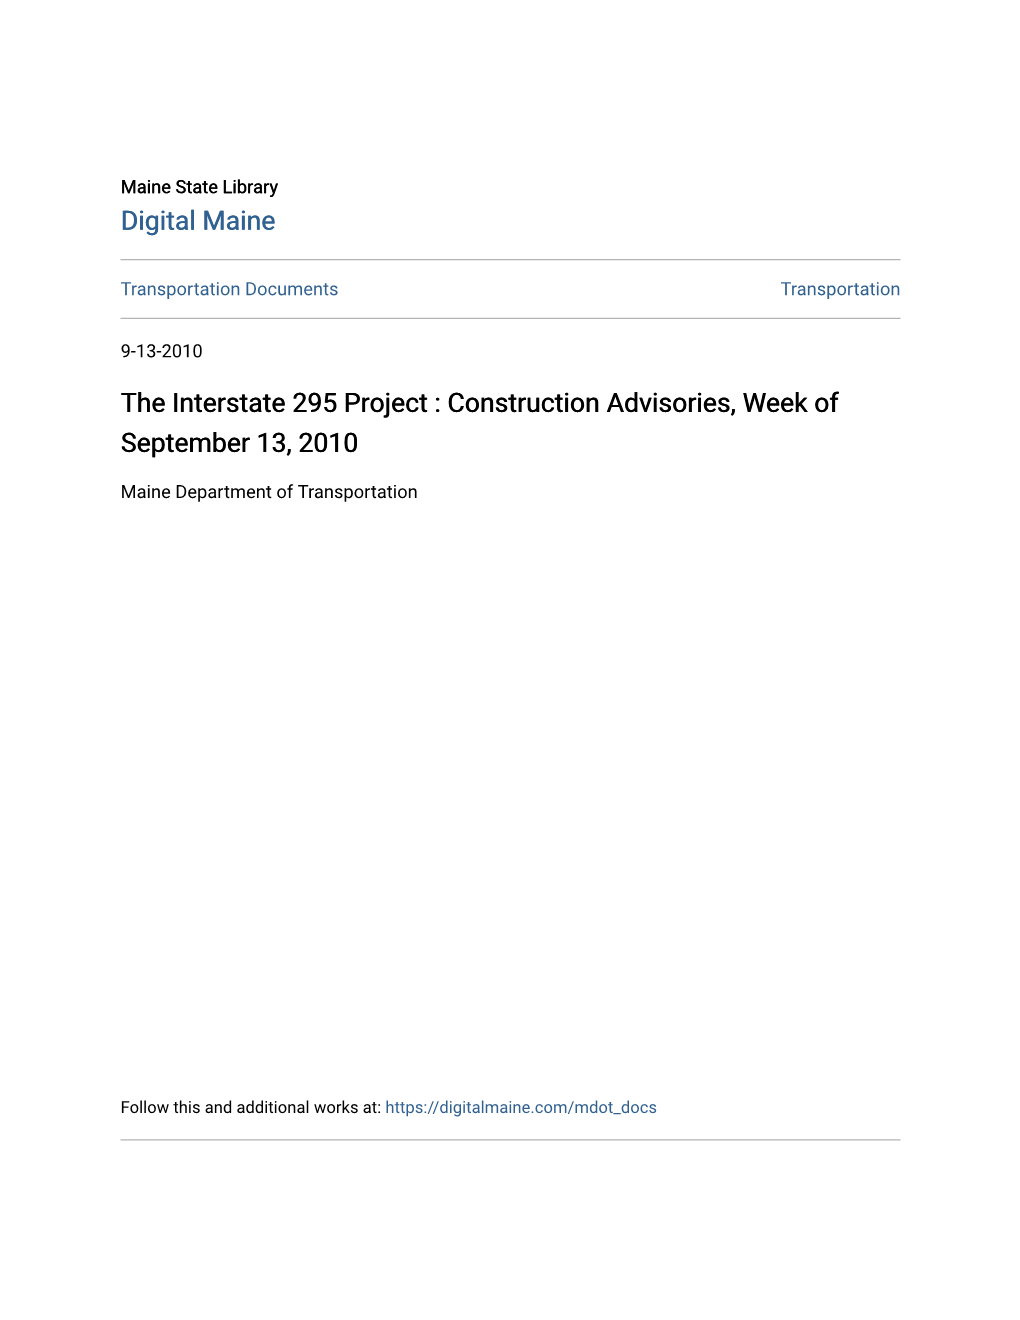 The Interstate 295 Project : Construction Advisories, Week of September 13, 2010